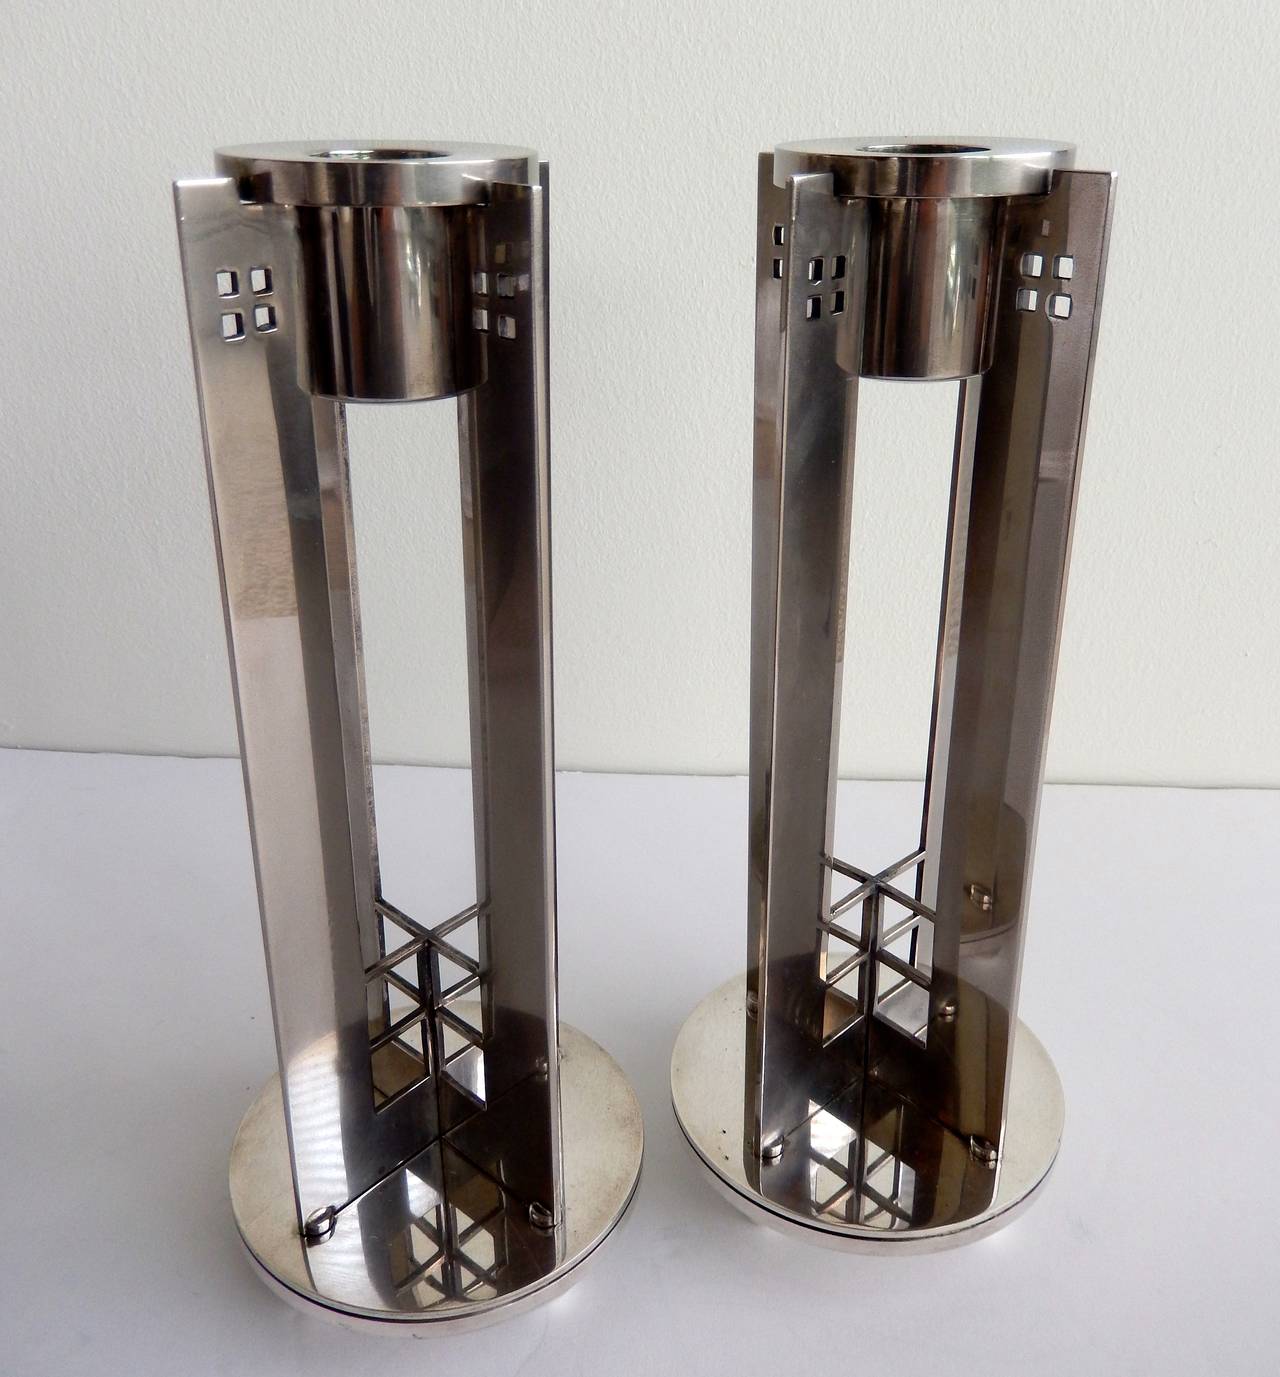 A pair of silver plated, vintage candlesticks with ball feet designed by the modernist American architect Richard Meier for Swid Powell. Their modern, geometric design with buttressed panels and square cut-out reflects Meier's interest in classical